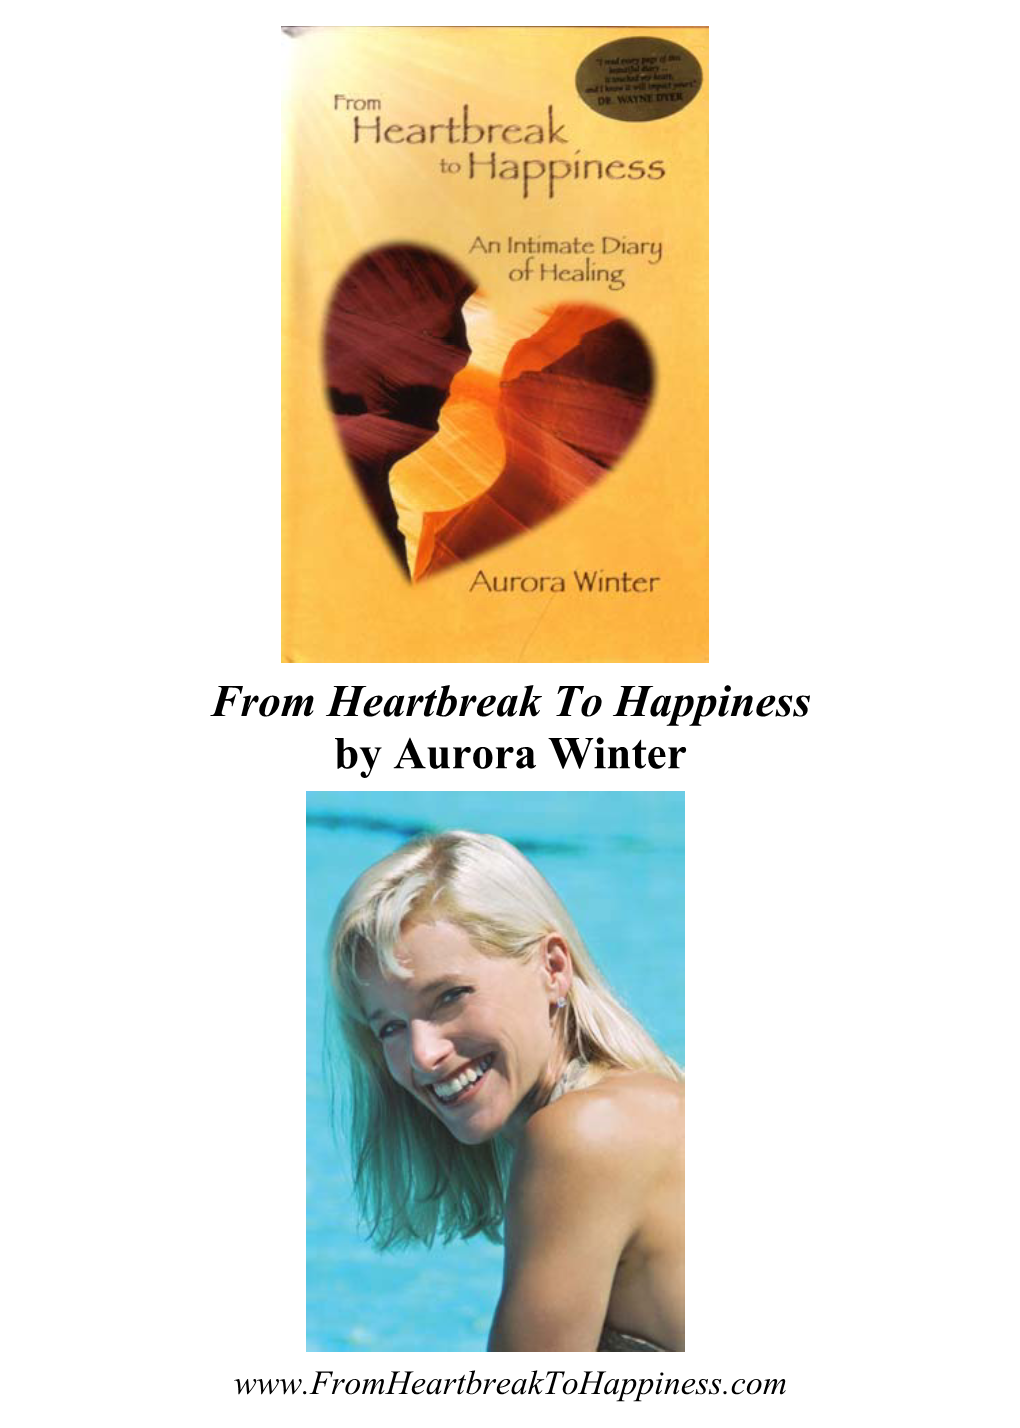 From Heartbreak to Happiness by Aurora Winter